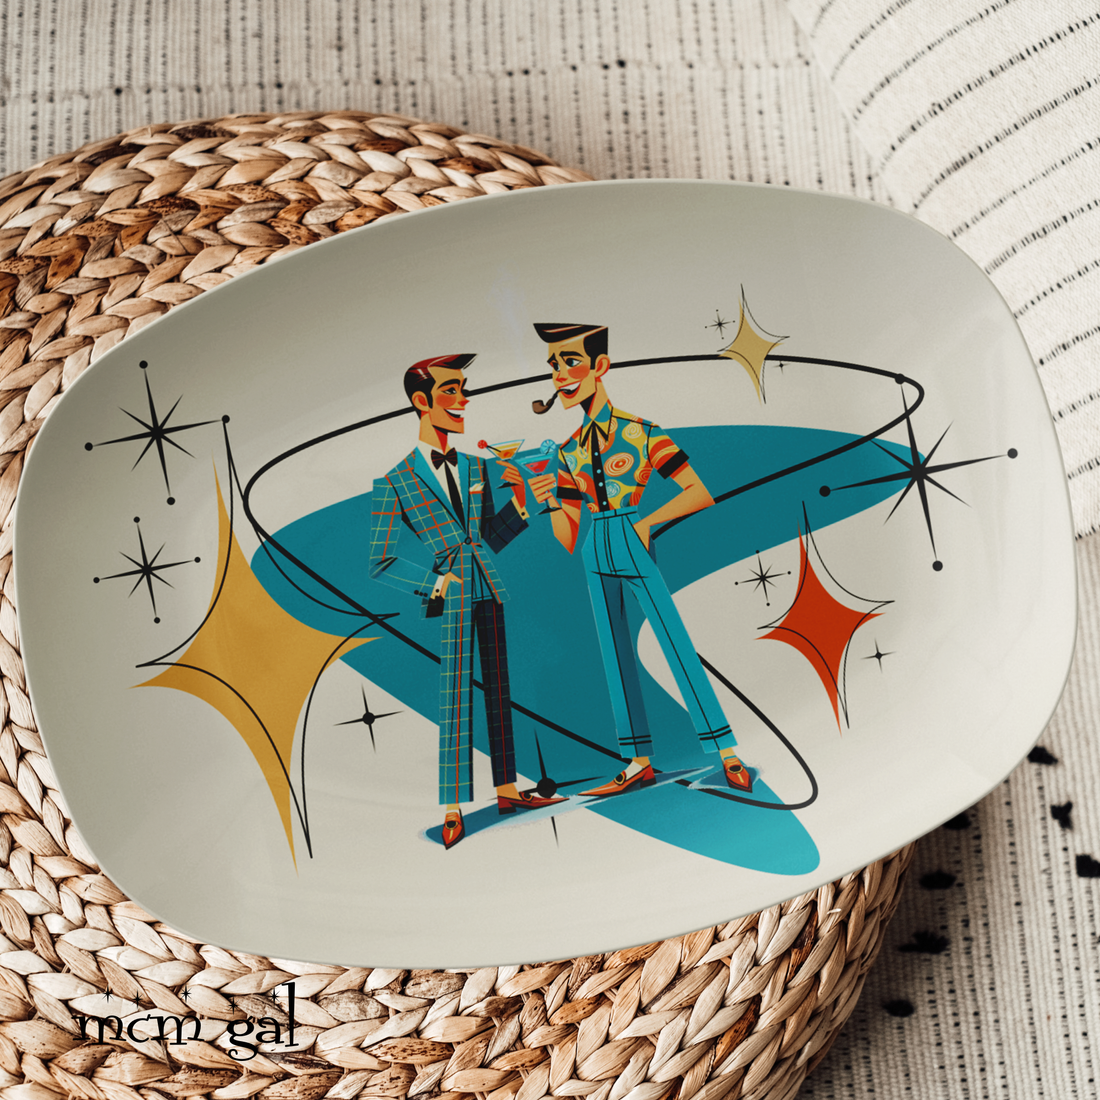 GAY MALE COUPLE SPECIAL GIFT, PRIDE MONTH, MID CENTURY MODERN Party Platter